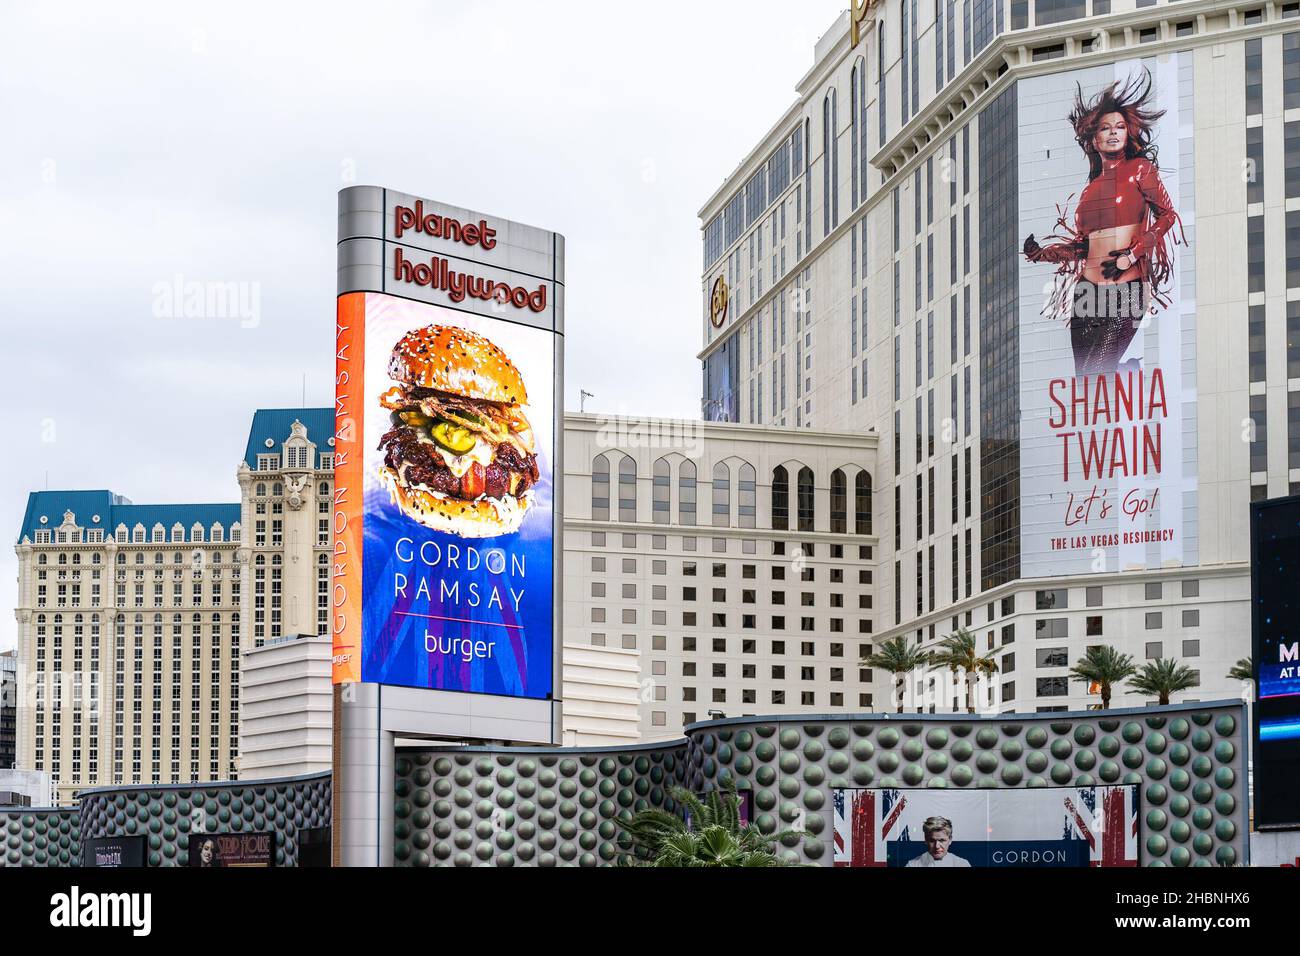 Planet hollywood vegas hi-res stock photography and images - Alamy